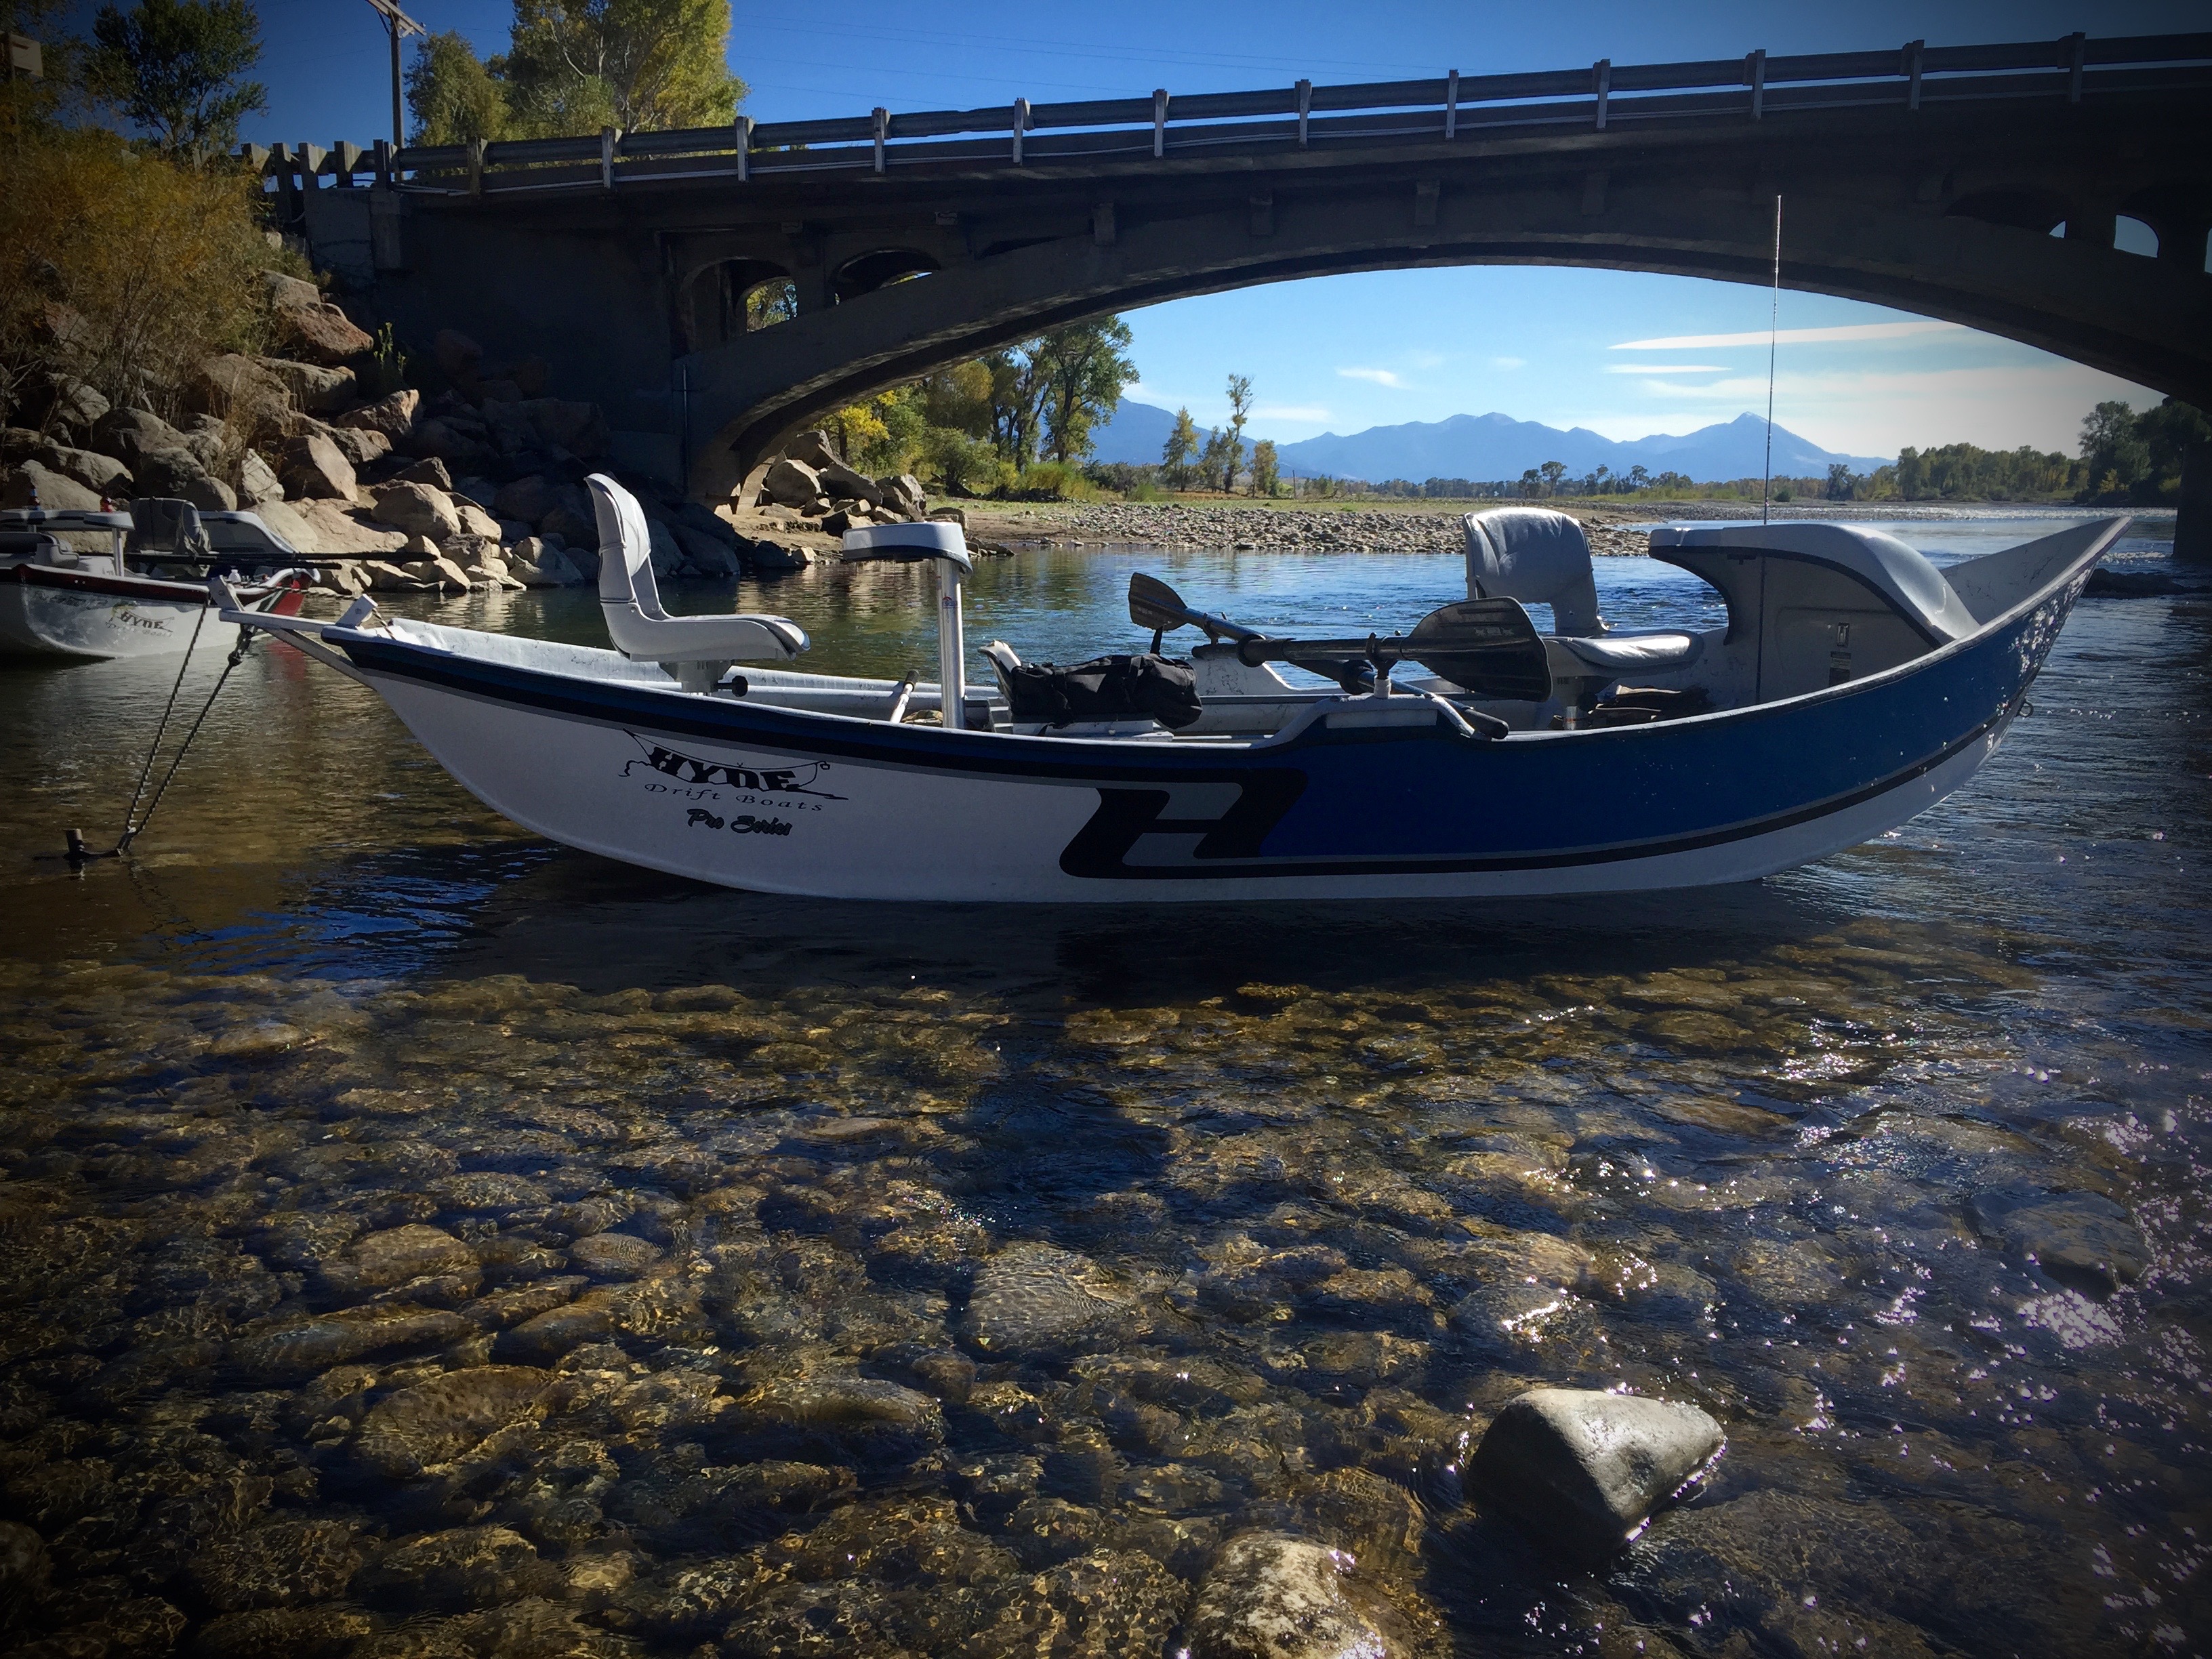 Boat on the Yellowstone River - Montana 